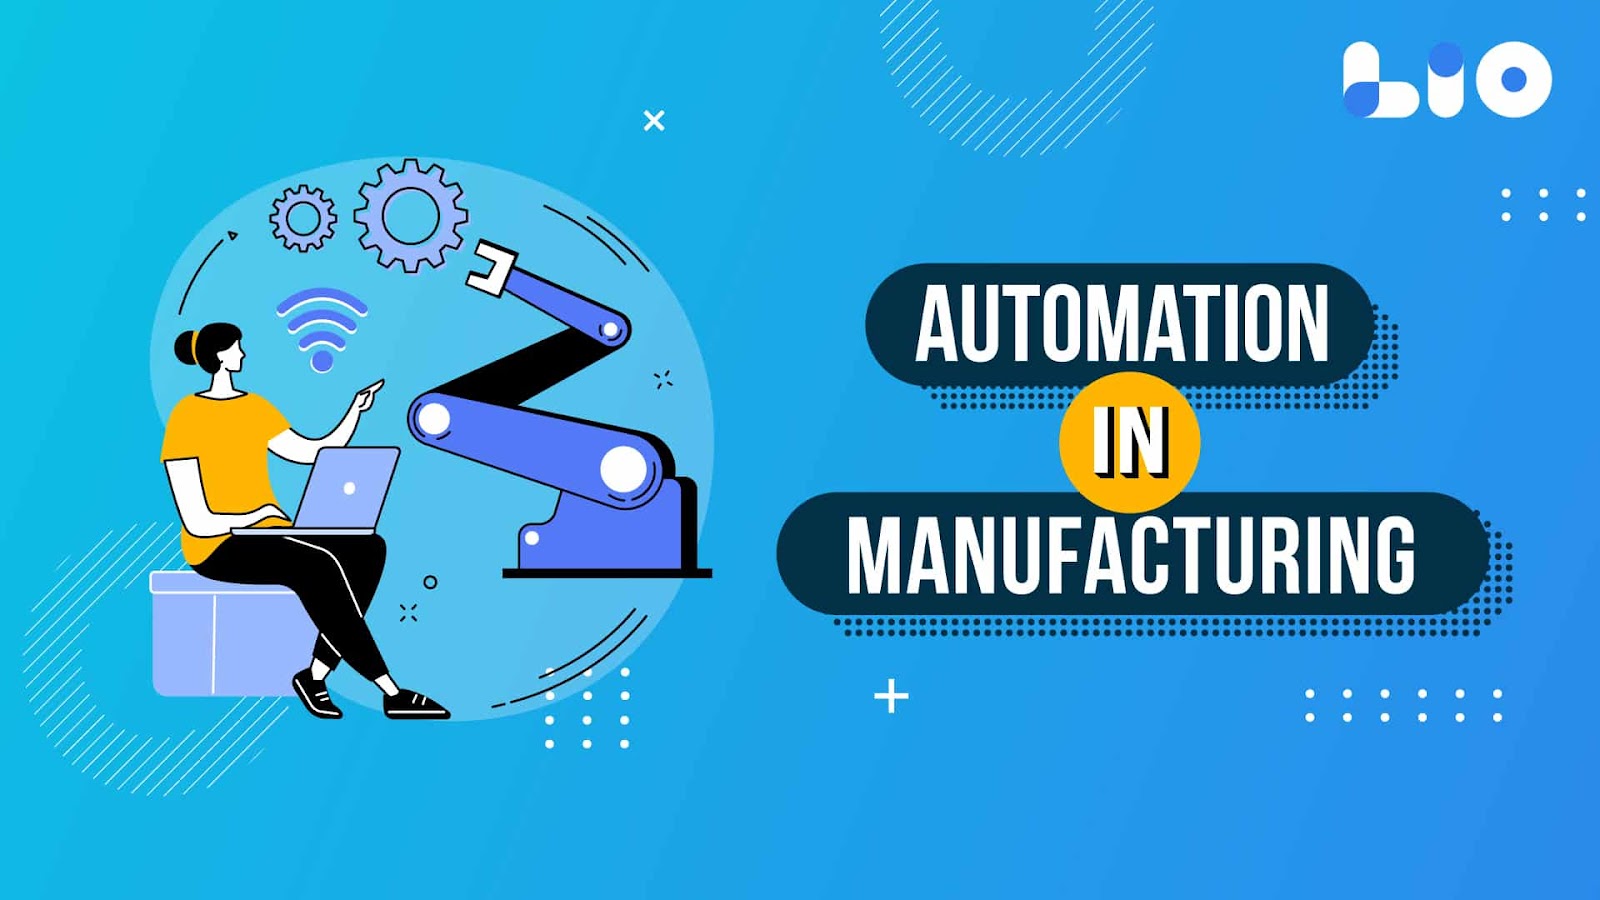 What Is The Simplest Form Of Automation